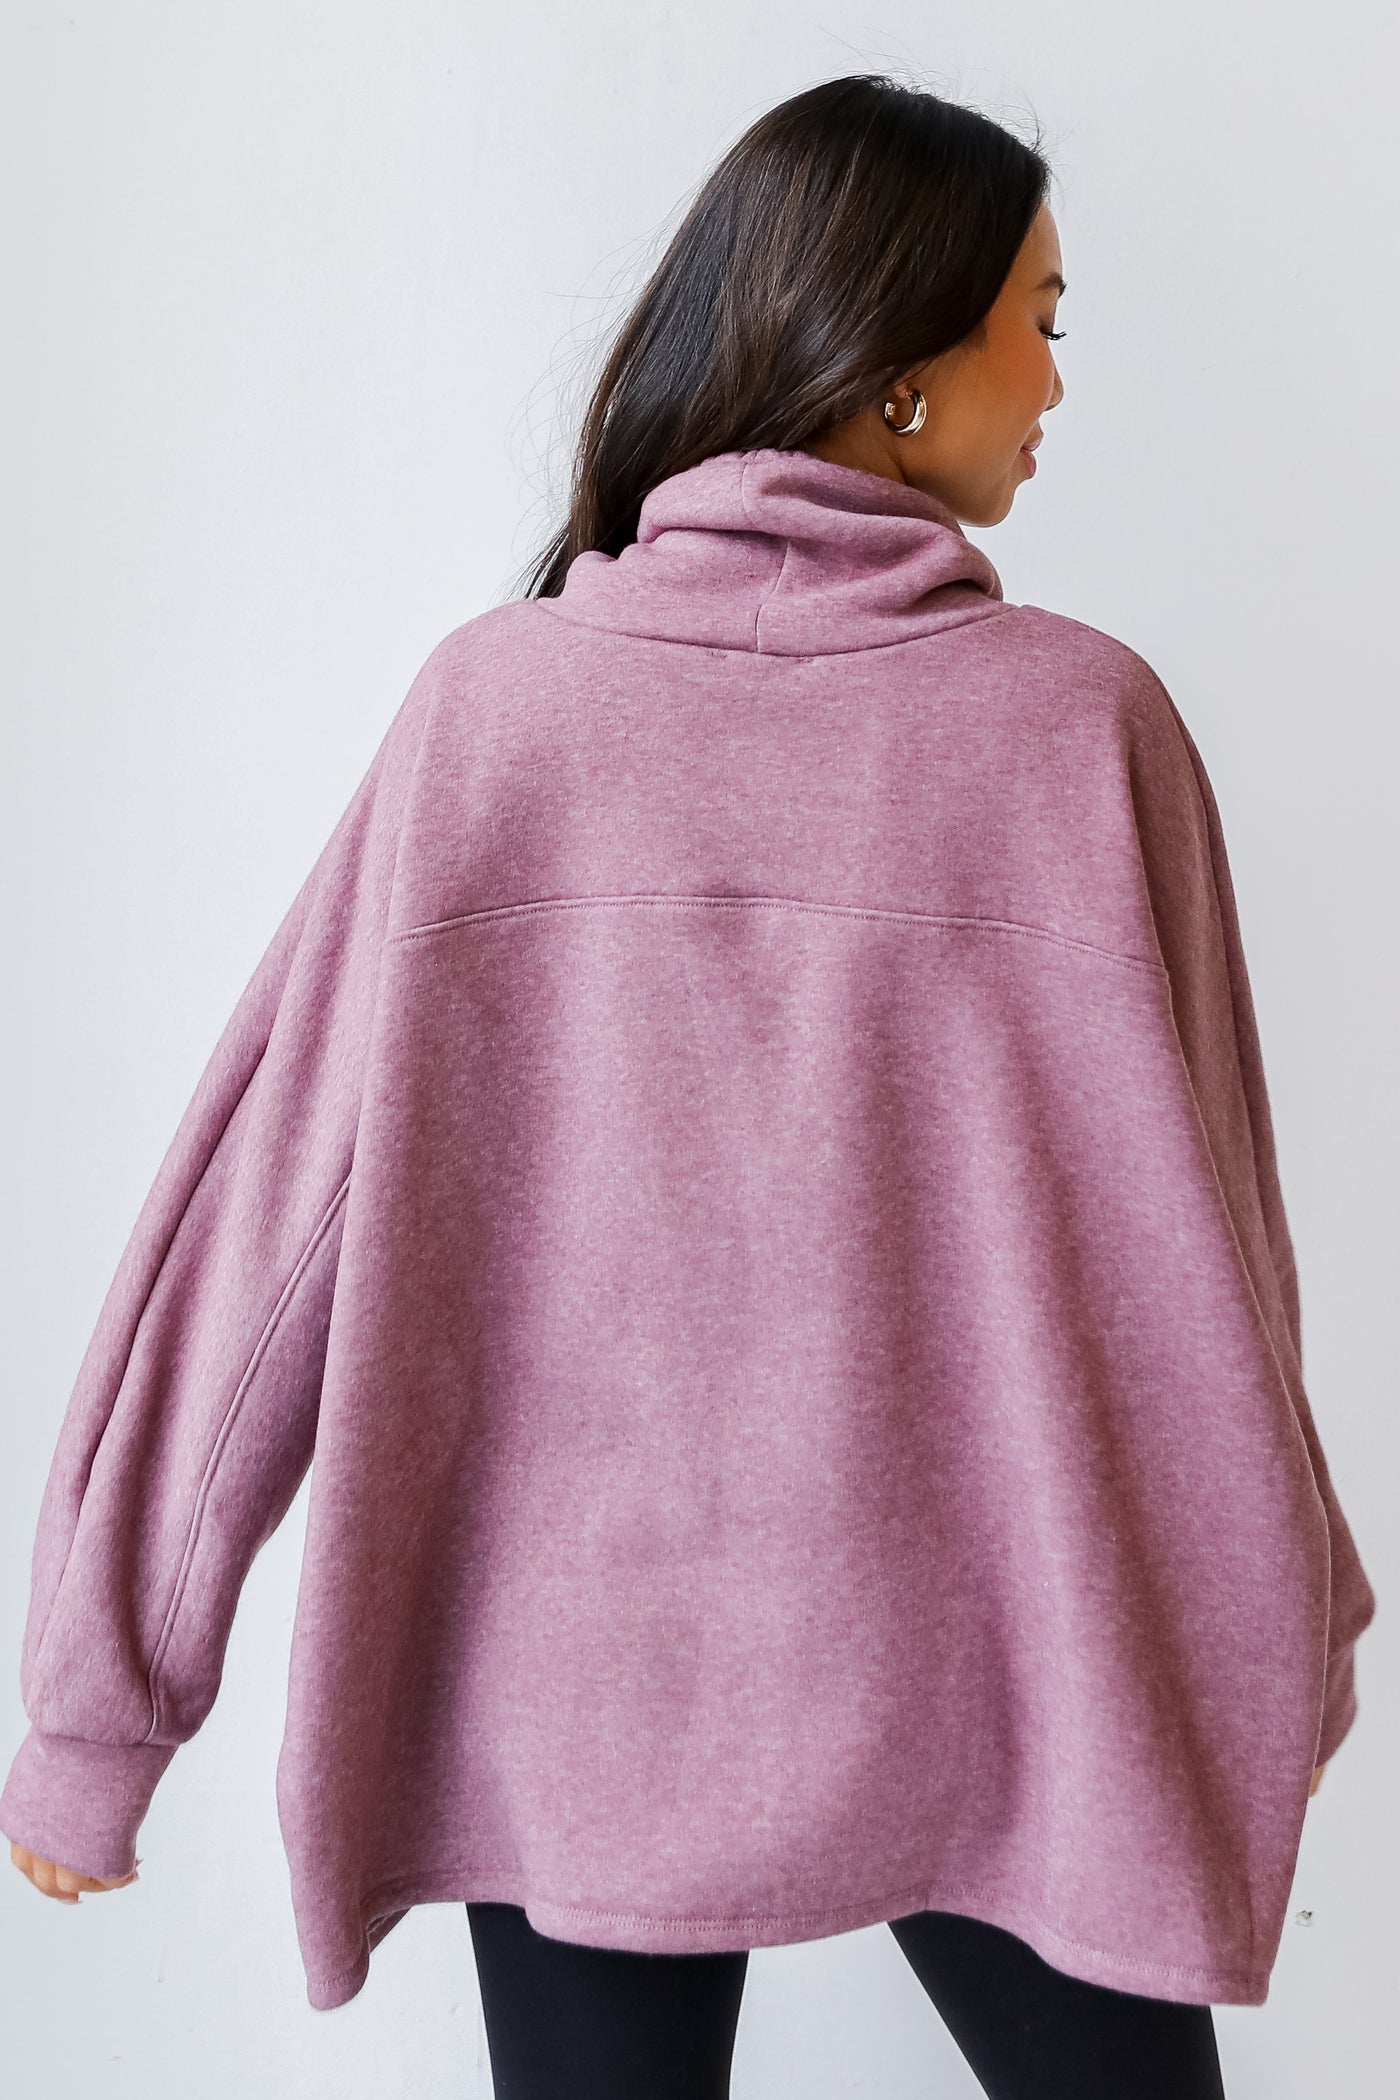 Cowl Neck Pullover in wine back view